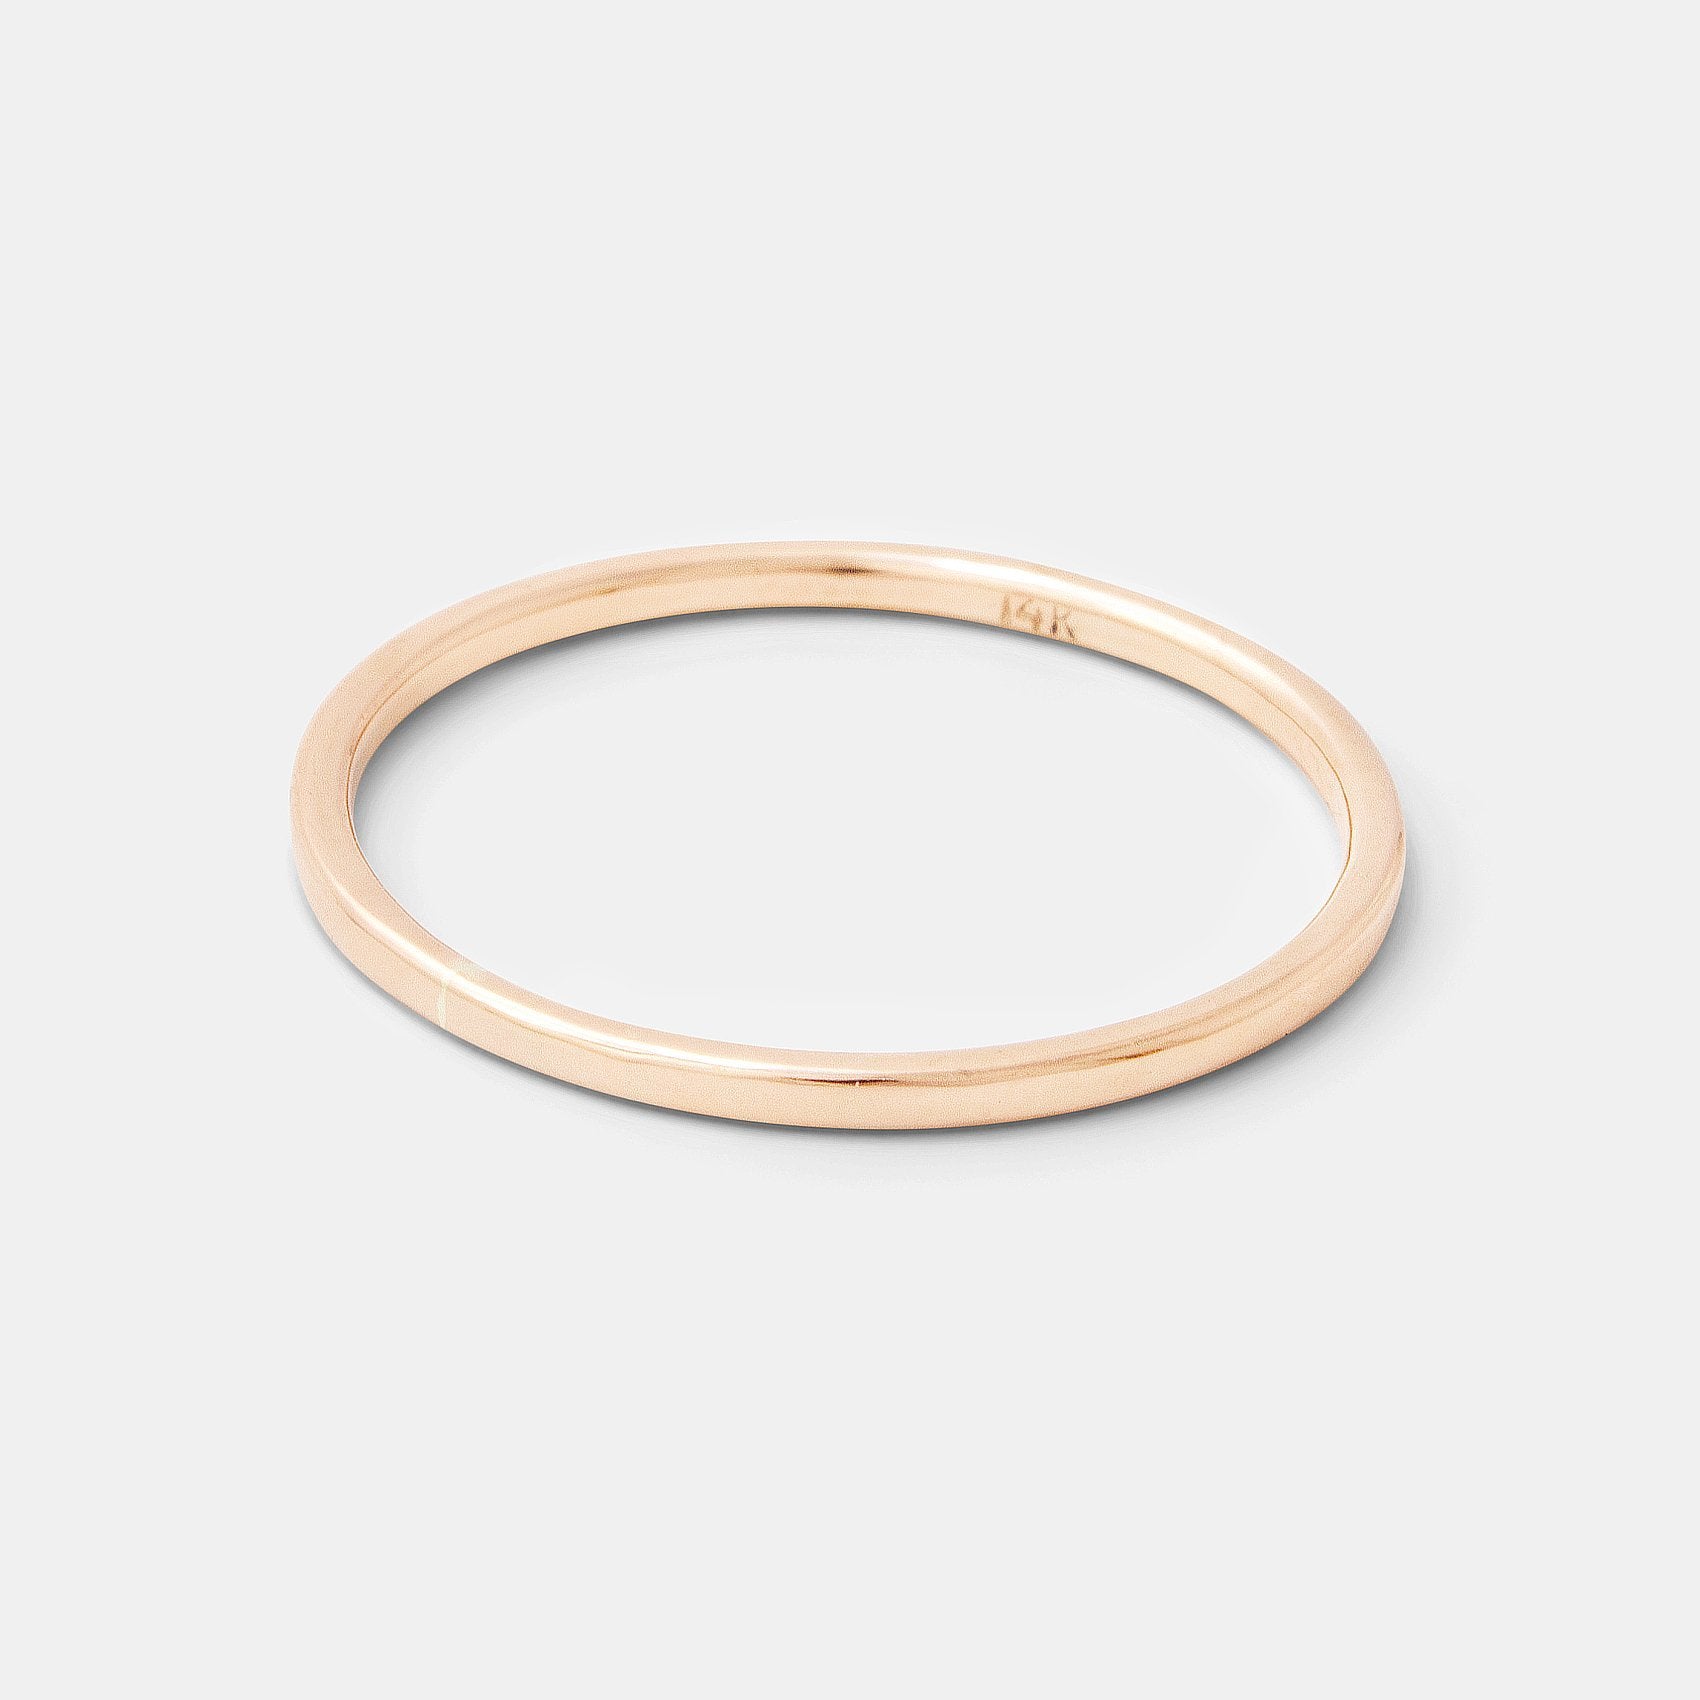 Solid rose gold stacking ring - Simone Walsh Jewellery Australia